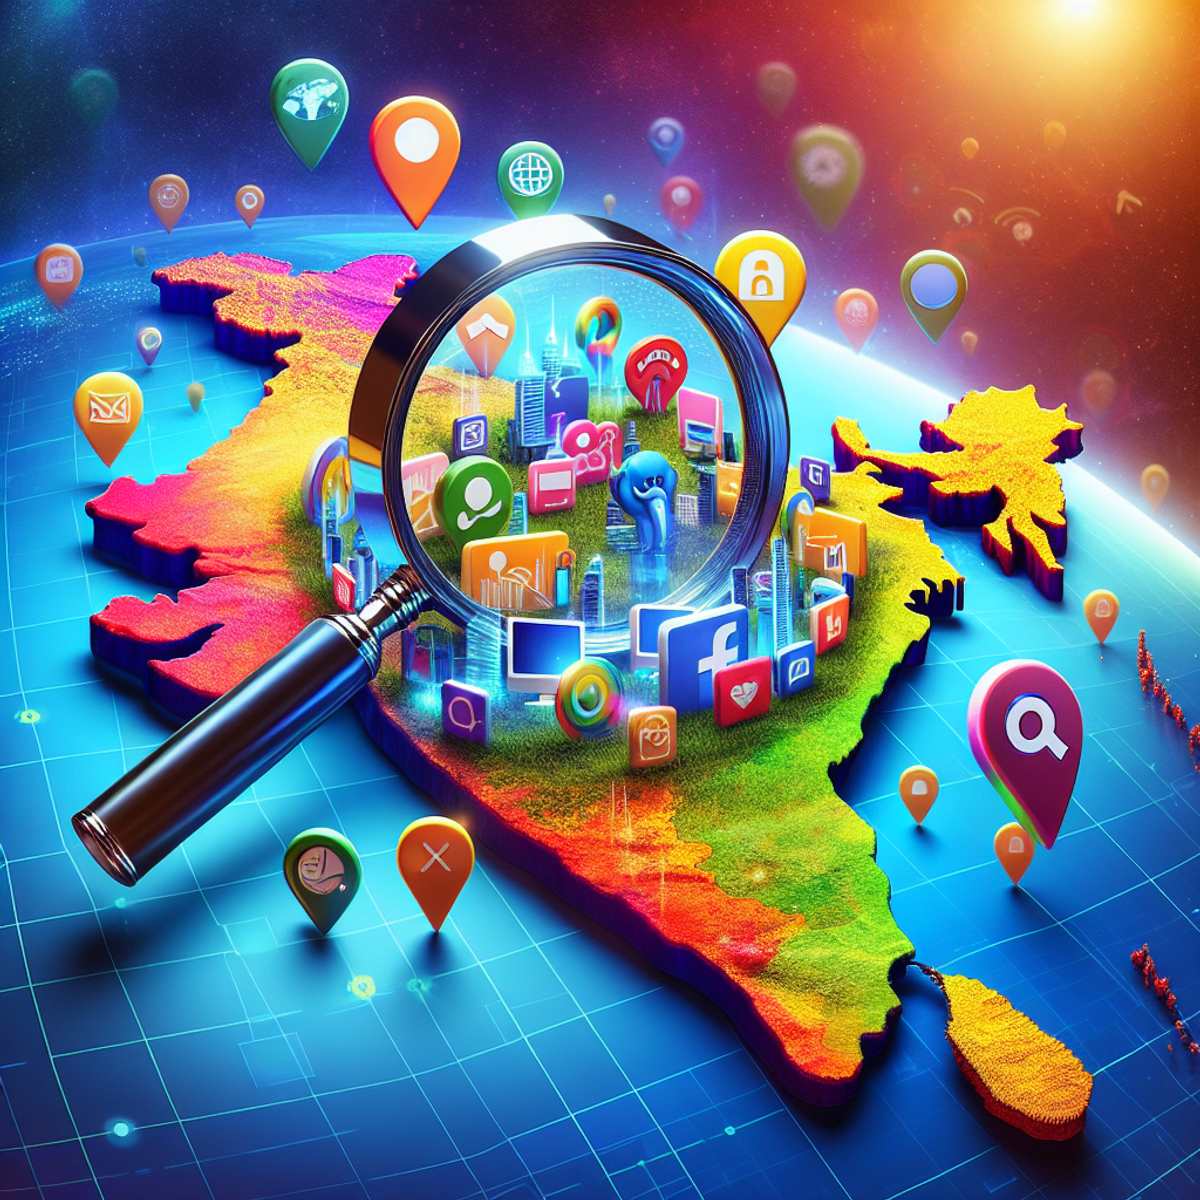 A magnifying glass hovers over a map of India, dotted with various internet platform icons.